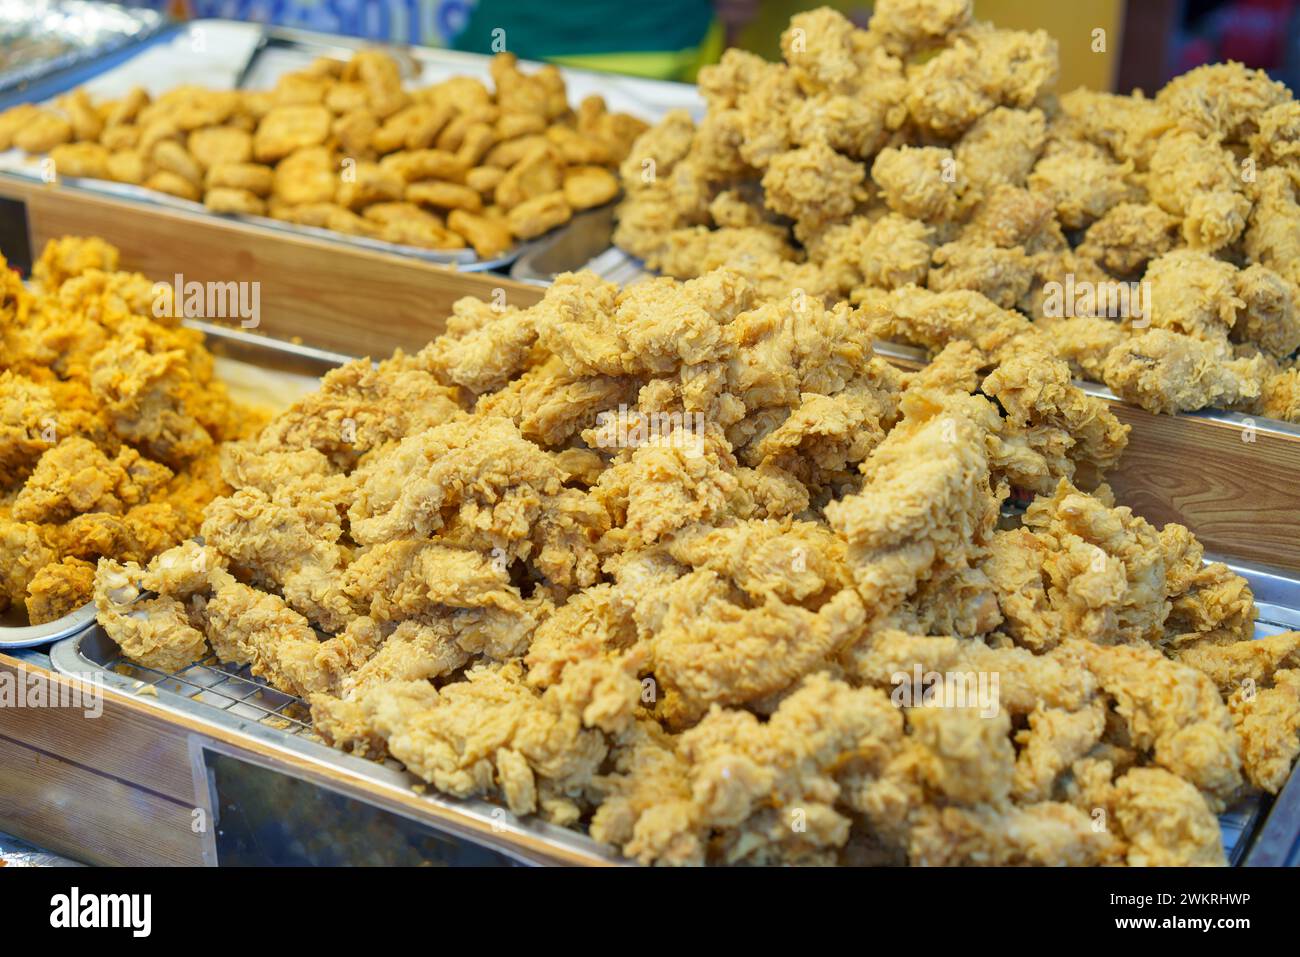 Trays filled with crispy golden fried chicken pieces, ready to be served to customers at a busy food market Stock Photo